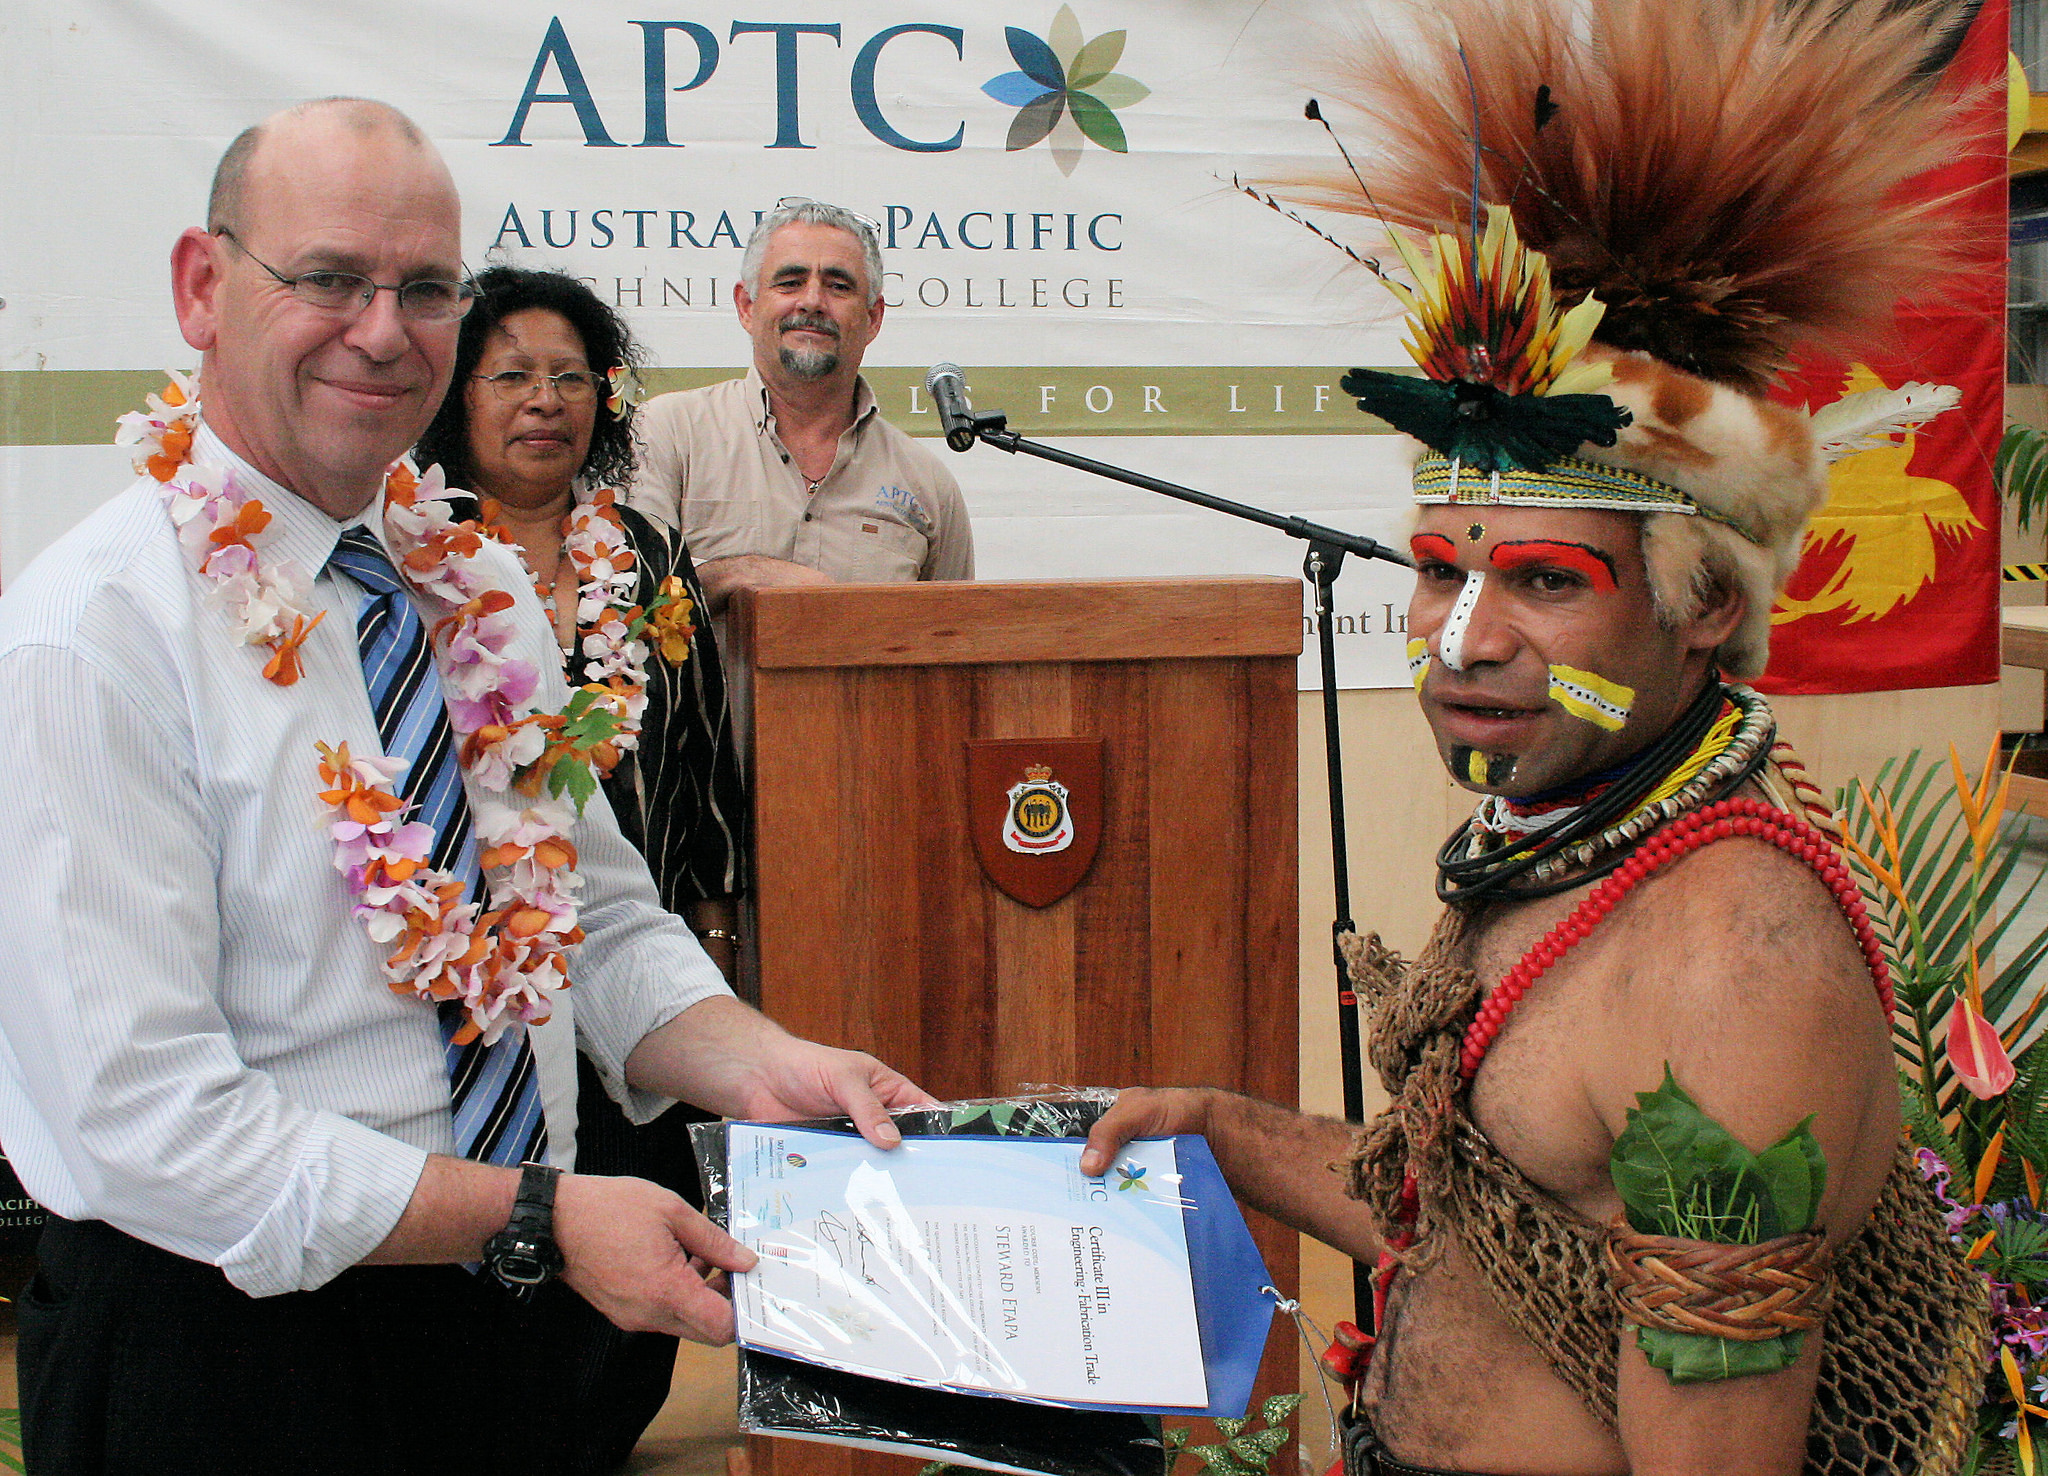 A photo from the 2010 APTC graduation (DFAT/Flickr/CC BY 2.0)